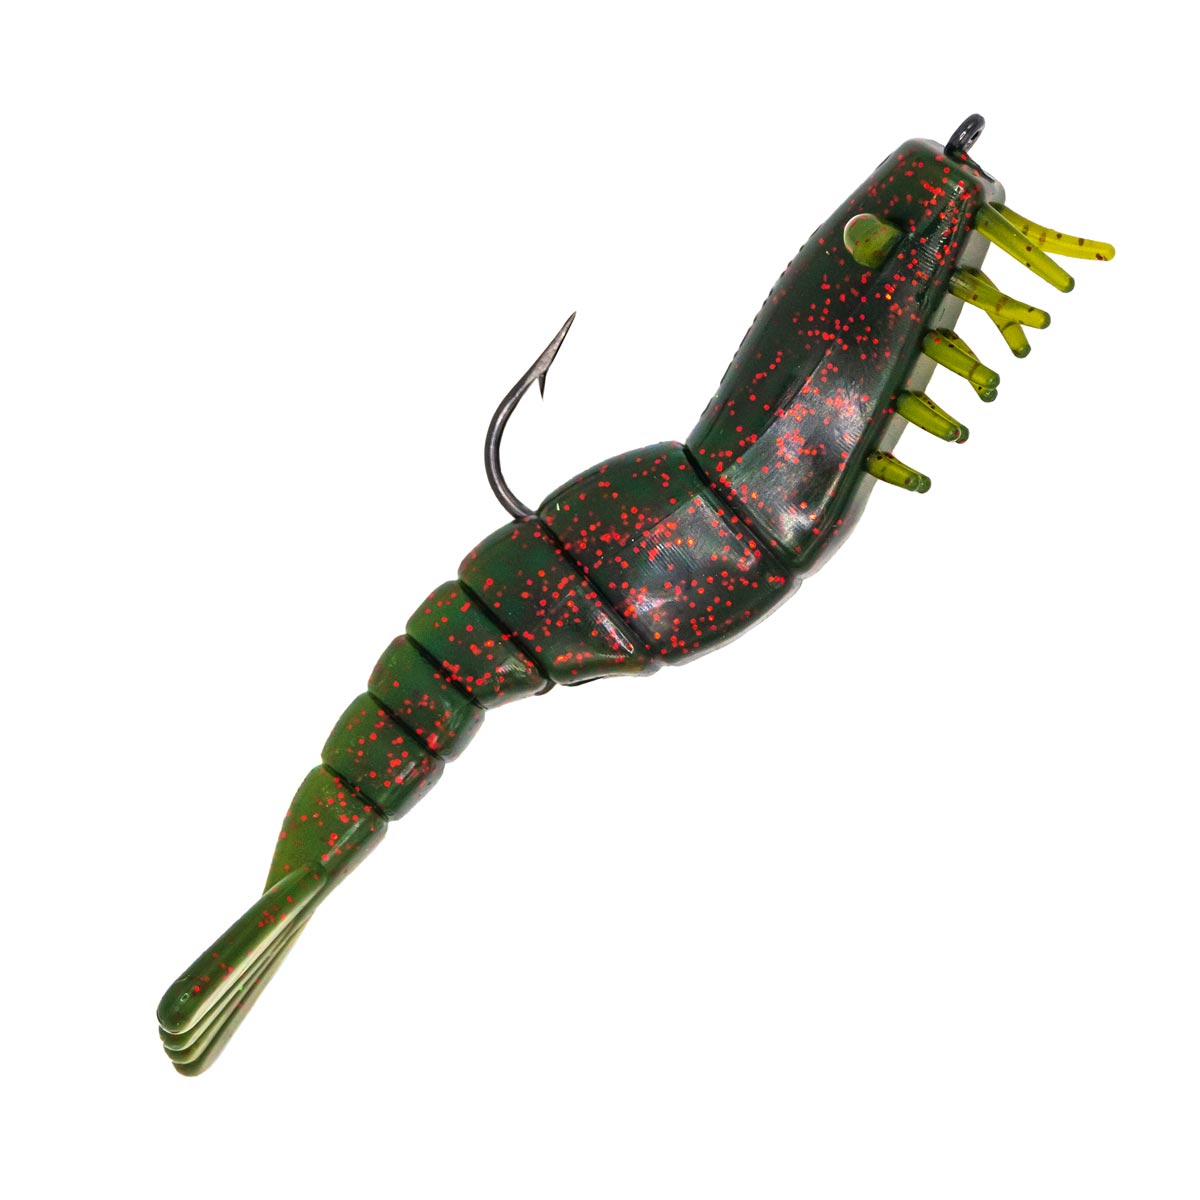 Artificial Shrimp Hook Only 3-1/4 Pearl/Chartreuse 3 Pack Artificial Shrimp  3-1/4 Pearl/Chartreuse Hook Only 3 Pack GS325LHO053 $5.49 [GS325LHO053] -  $5.49 : Almost Alive Lures, The best there ever was.